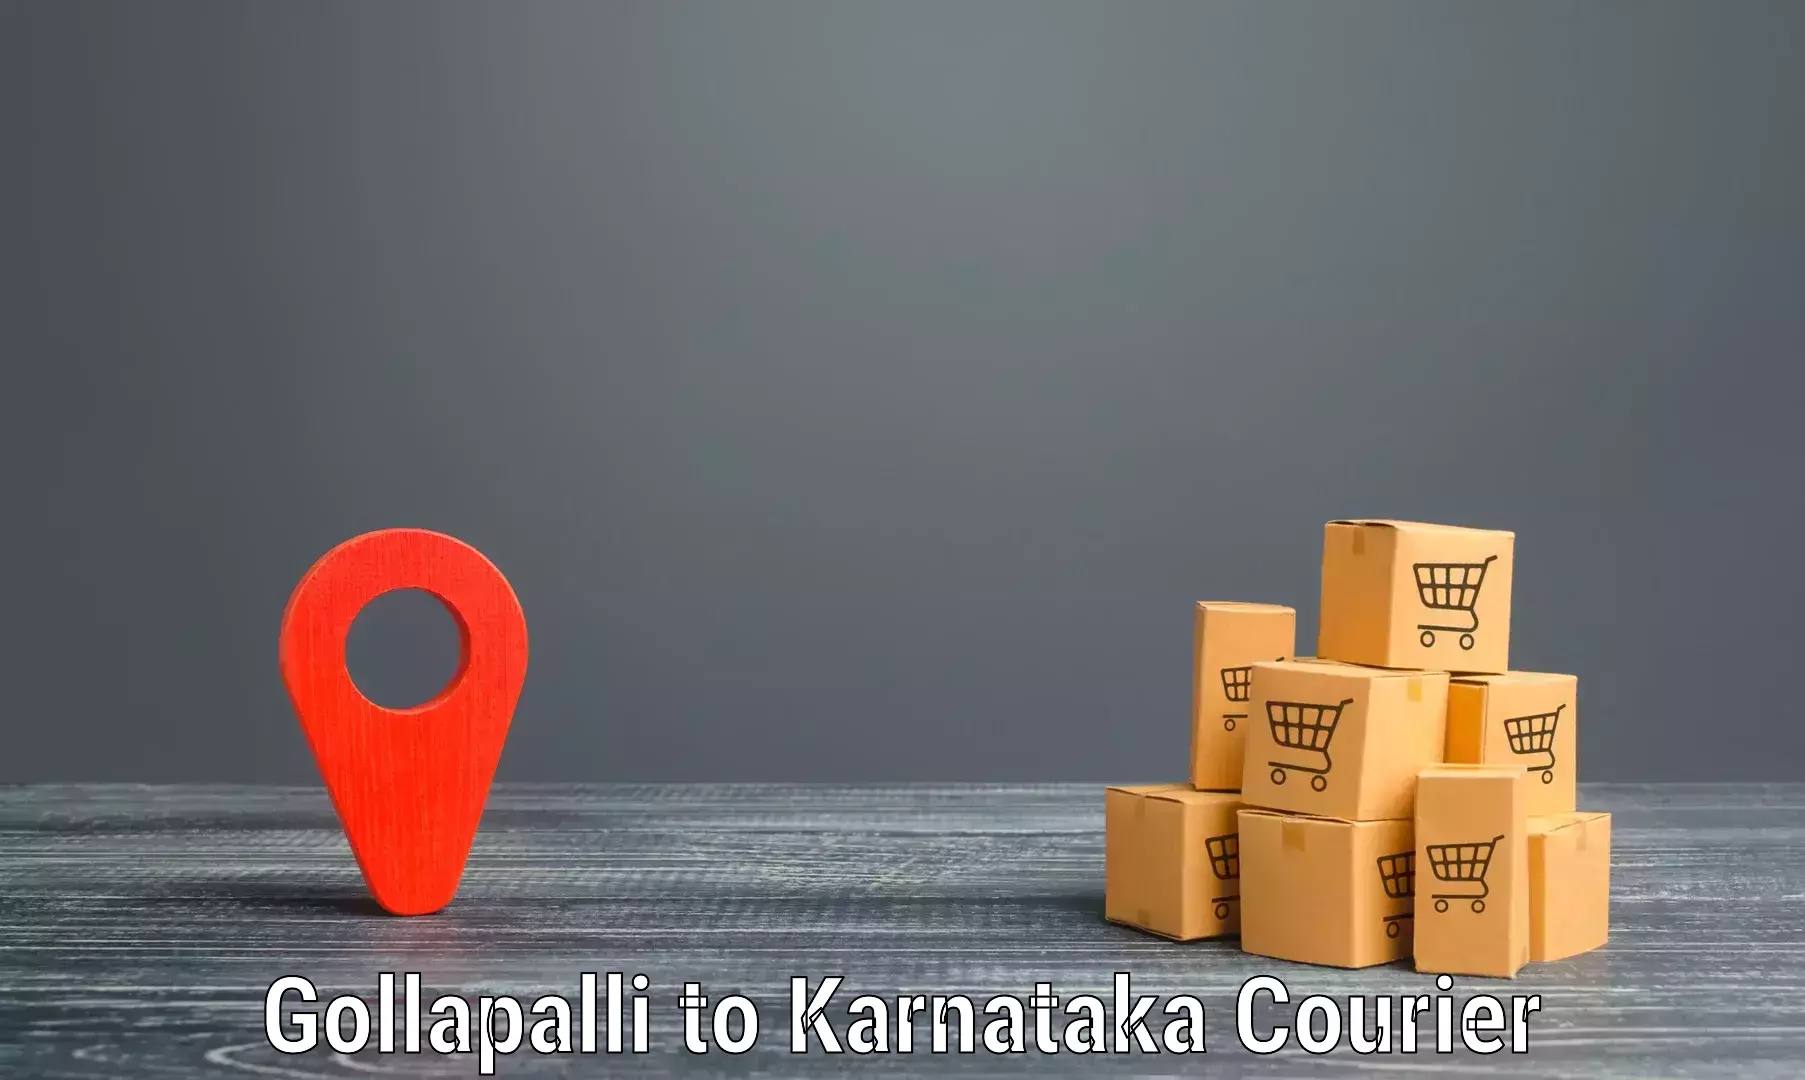 Reliable delivery network Gollapalli to Hoskote